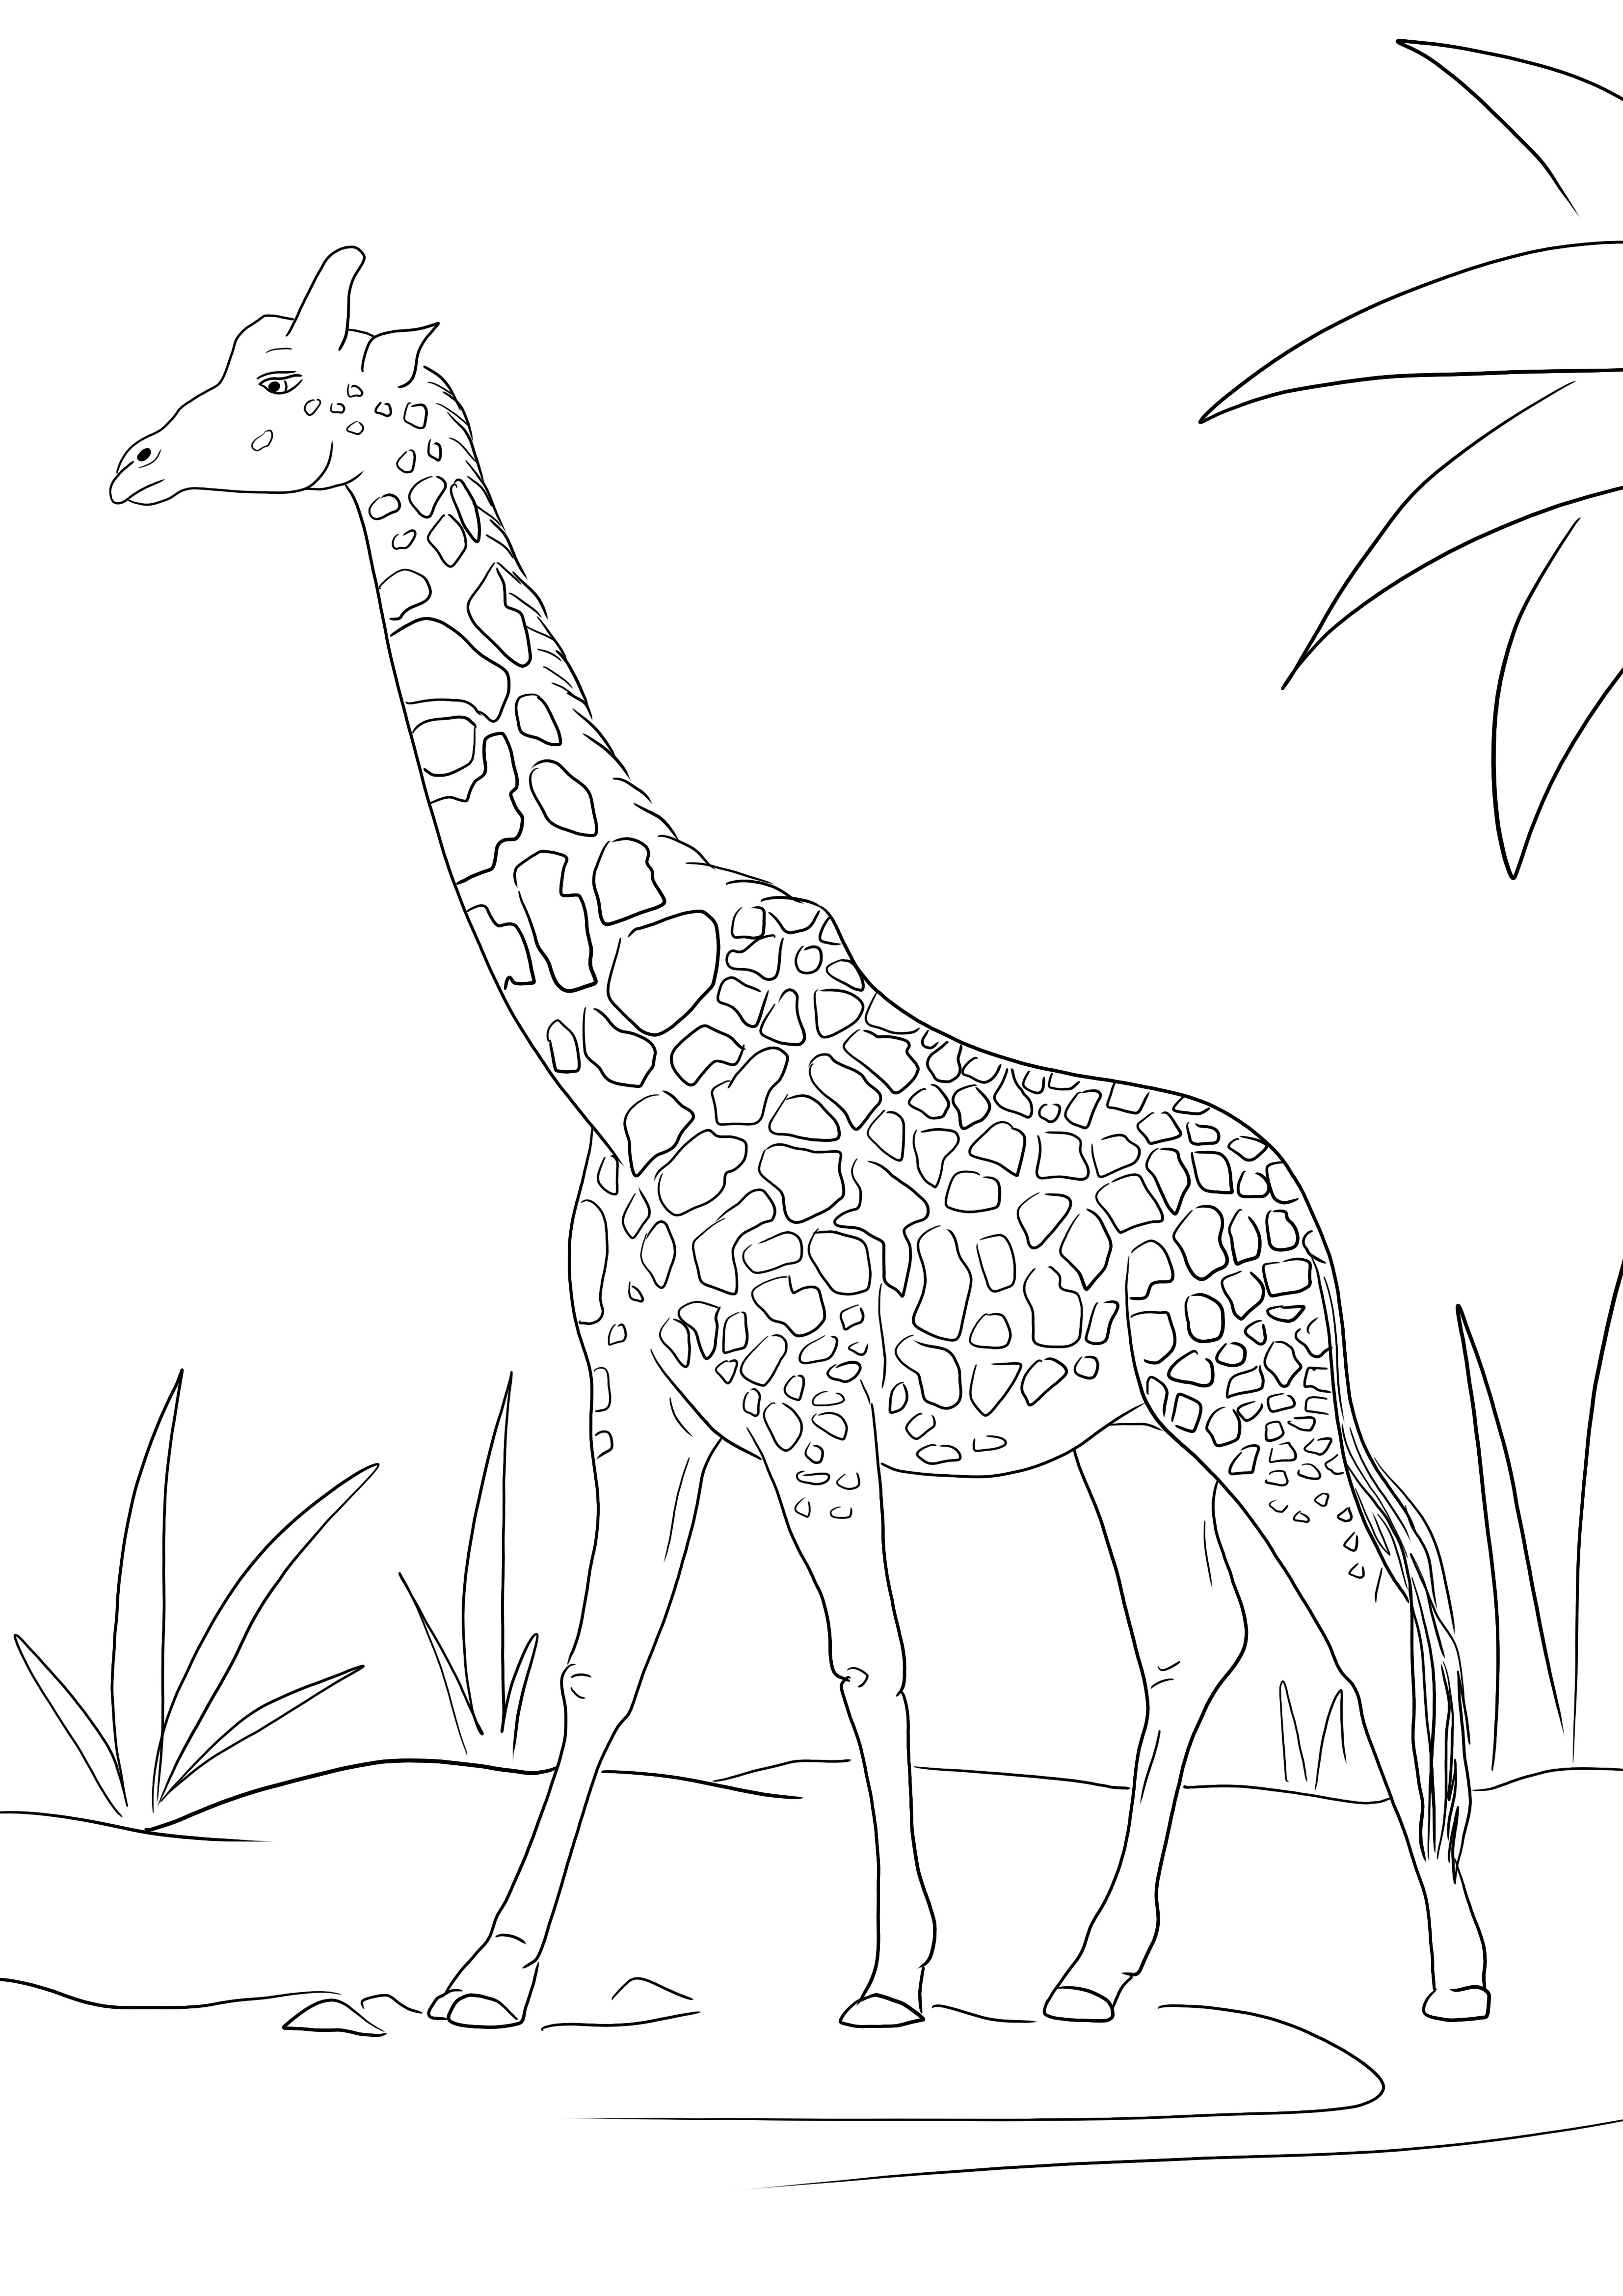 Realistic Giraffe coloring on full page-free printable picture for children